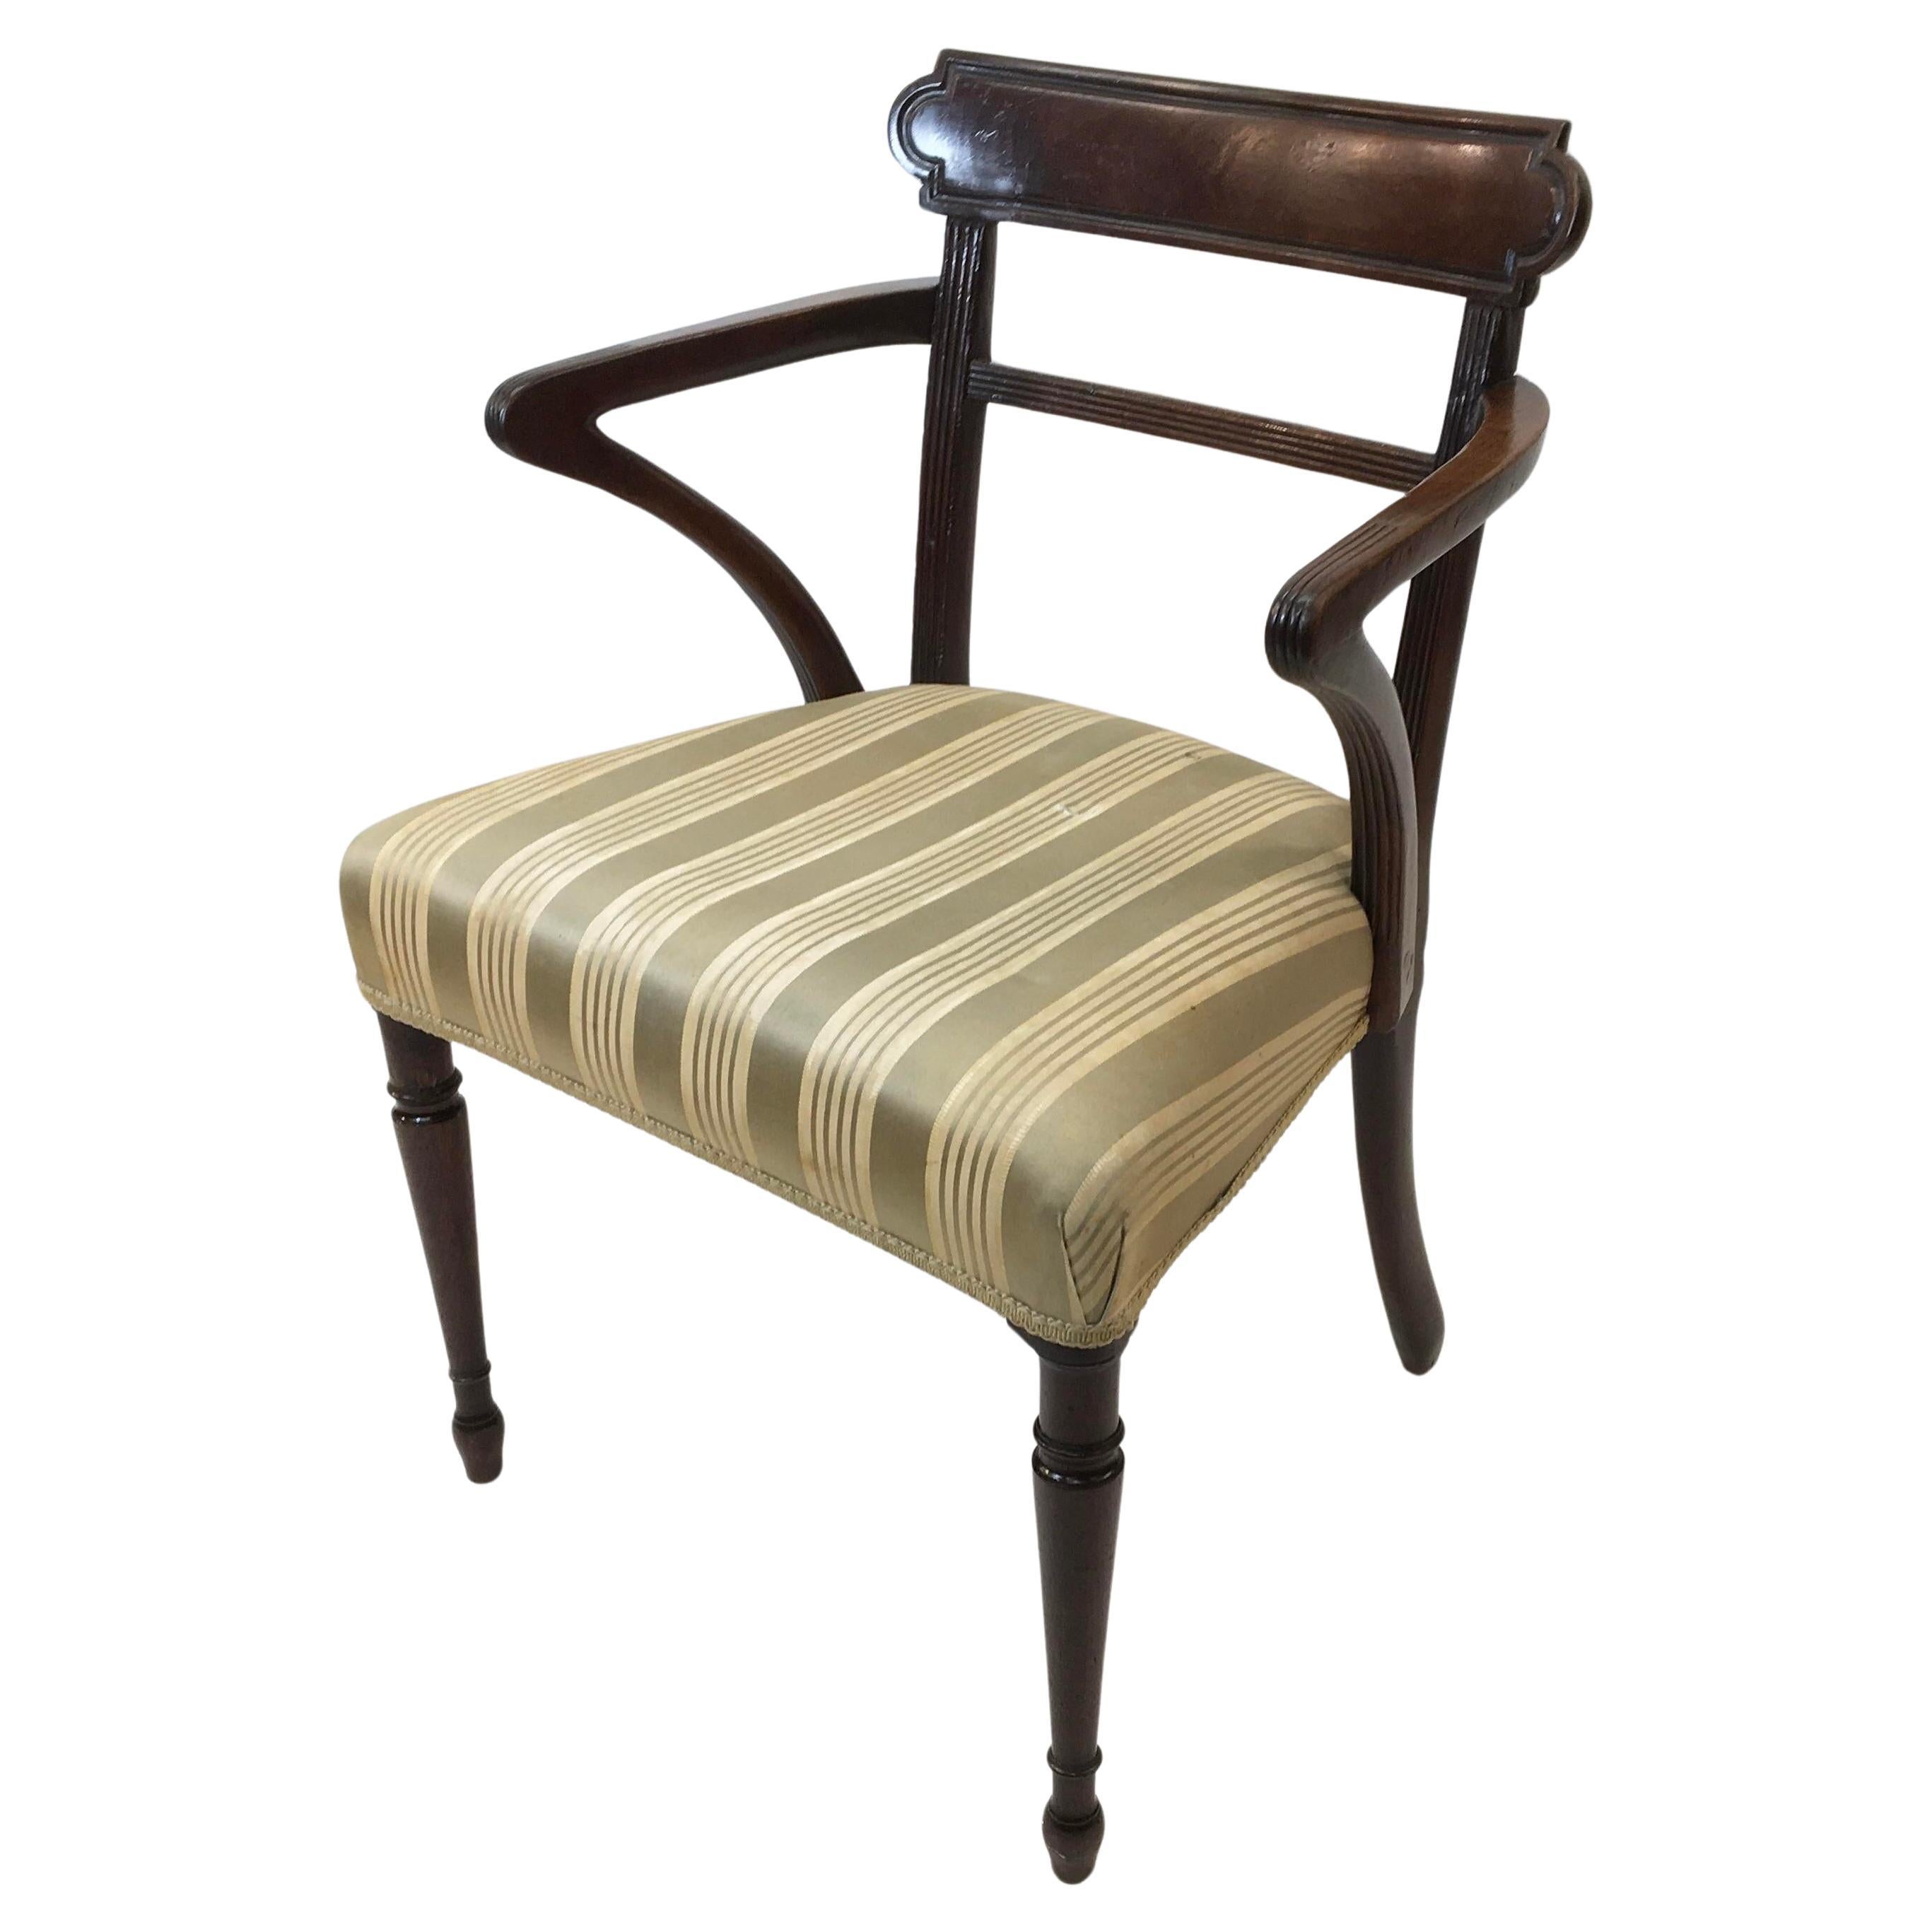 Early 19th Century Regency Mahogany Arm Chair For Sale